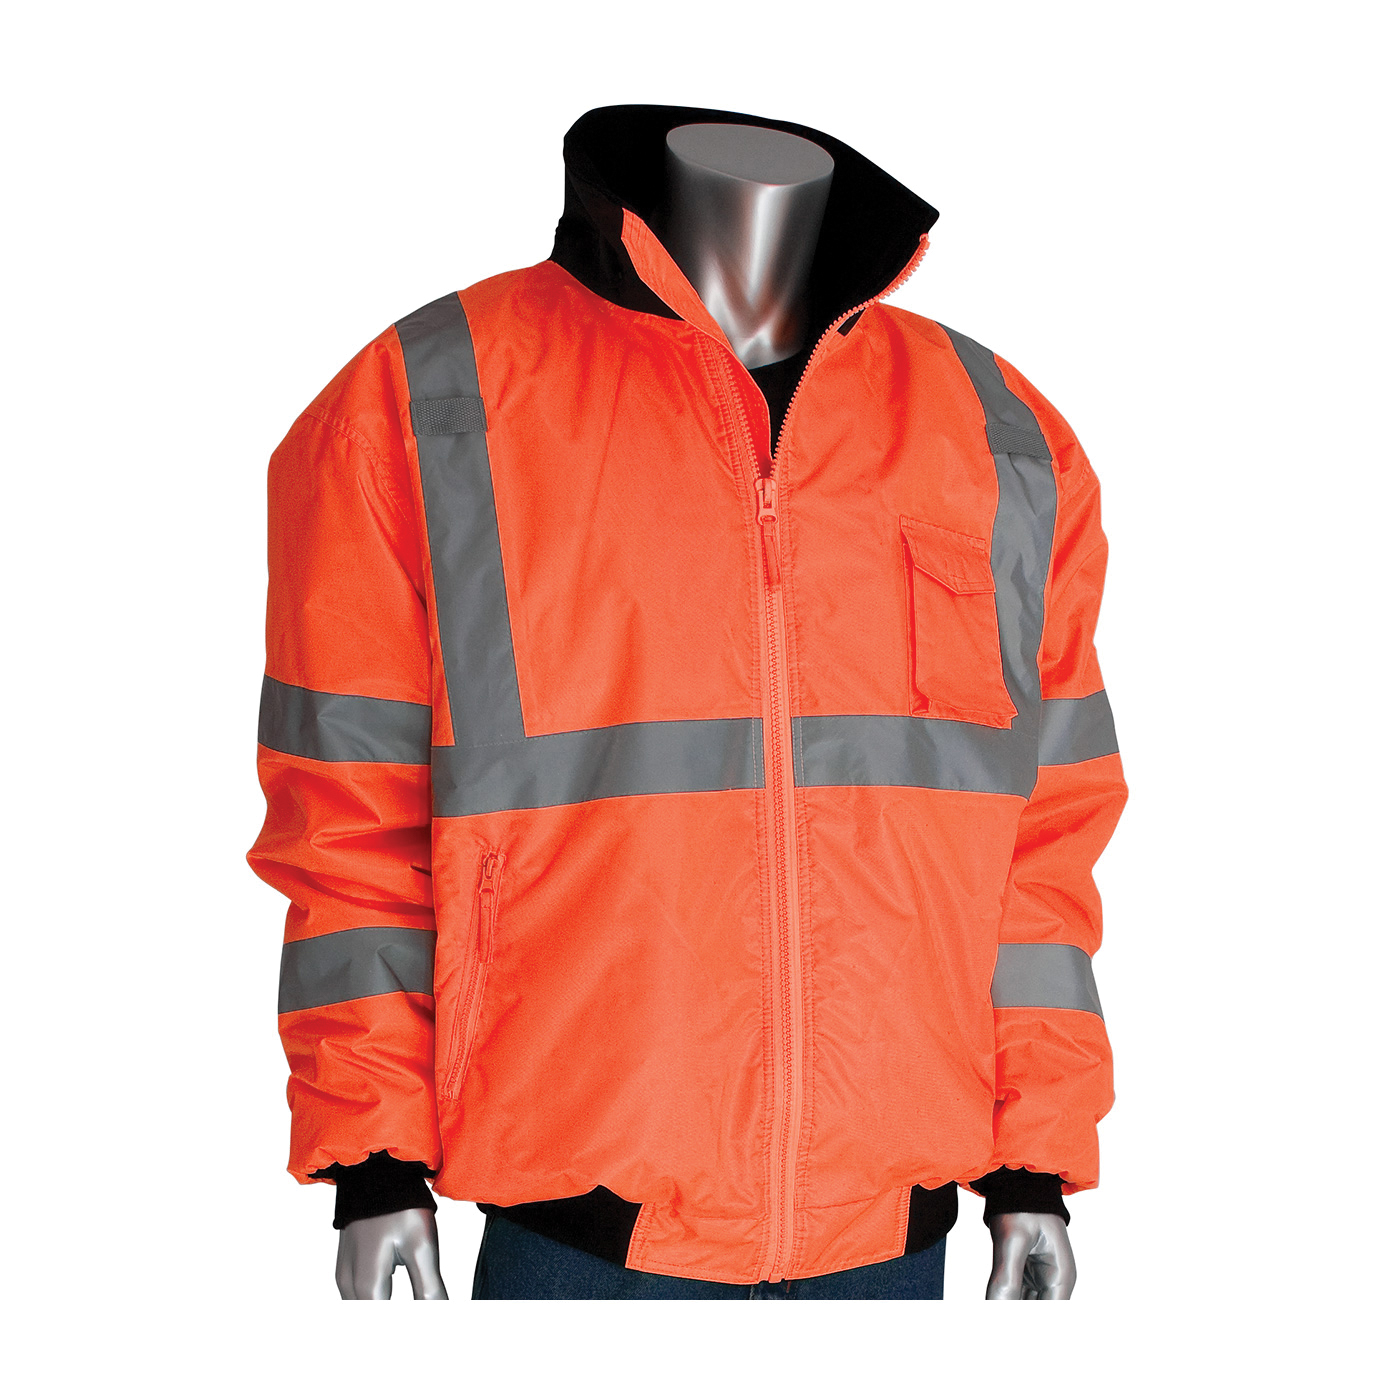 PIP® 333-1762-OR/S Bomber Jacket With Zip-Out Fleece Liner, Hi-Viz Orange, Polyester, 52 in Chest, Resists: Water, ANSI Type R Class 3